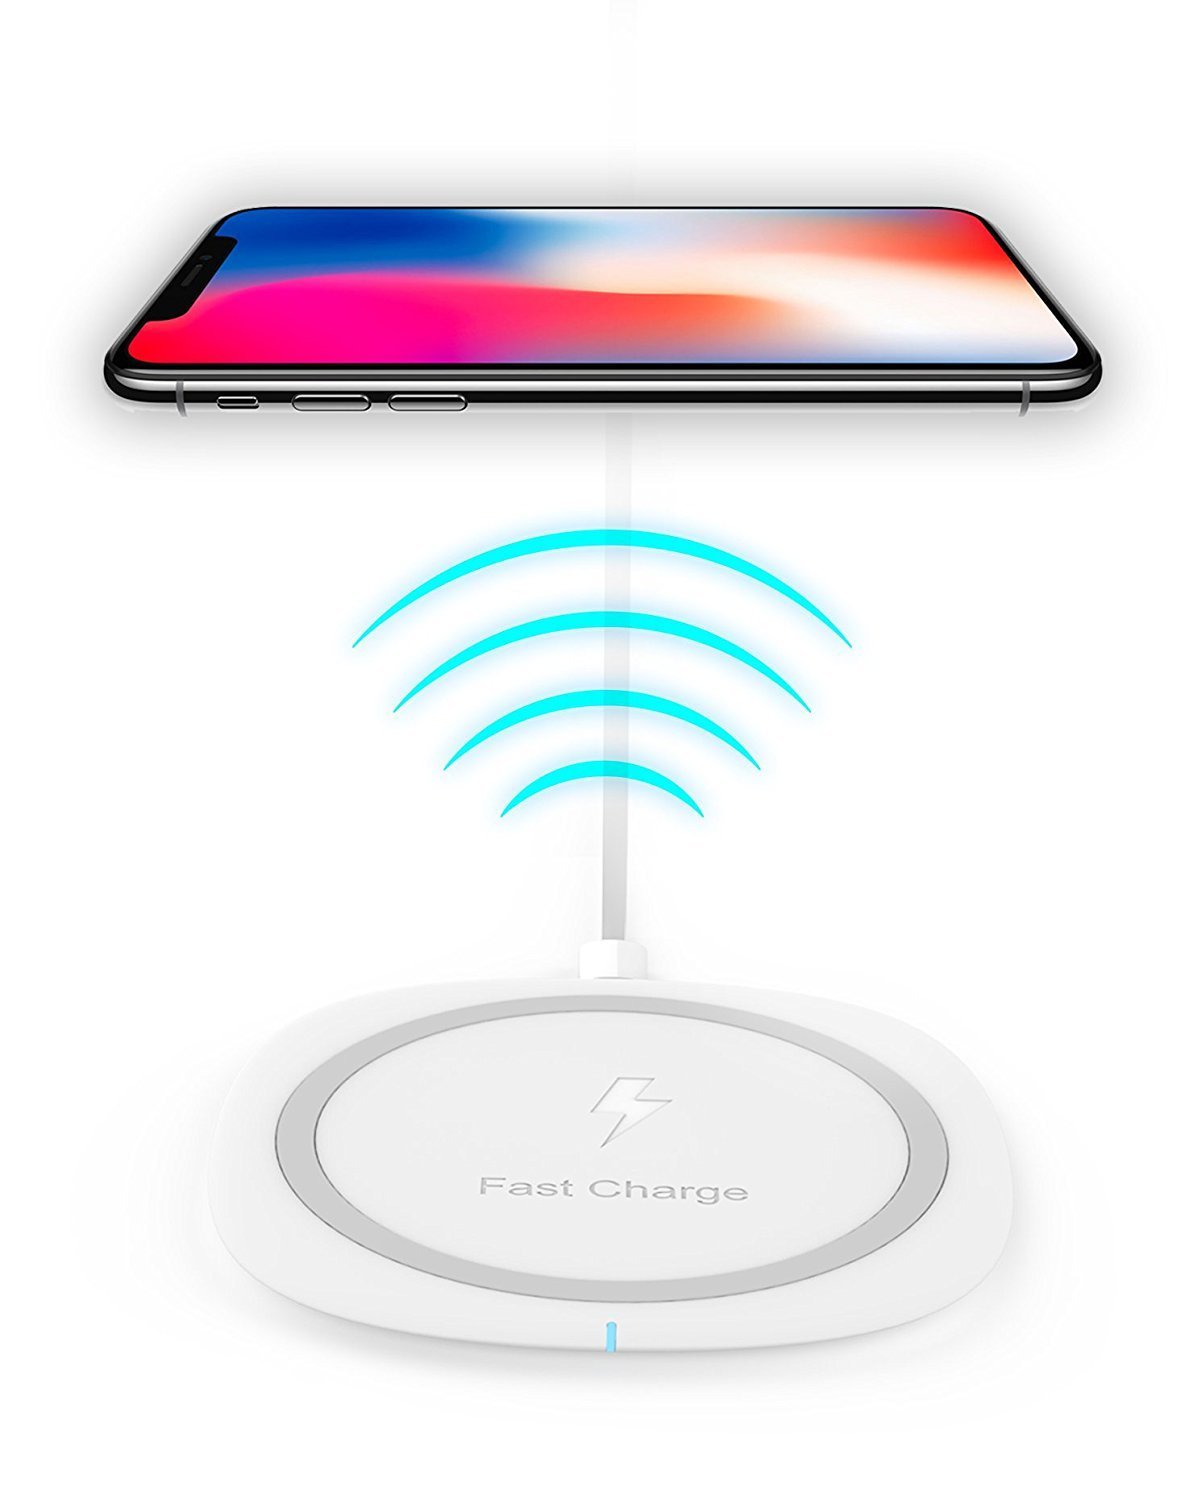 Ixir Qi Fast Wireless Charging For Samsung S8 Wireless Quick Charger Fast Charge 10W for iPhone X, iPhone 8, iPhone 8 Plus,Samsung Note 8, S6 Edge +, S7, S7 Edge, S8 and S8 Plus, etc. by Ixir - image 1 of 1